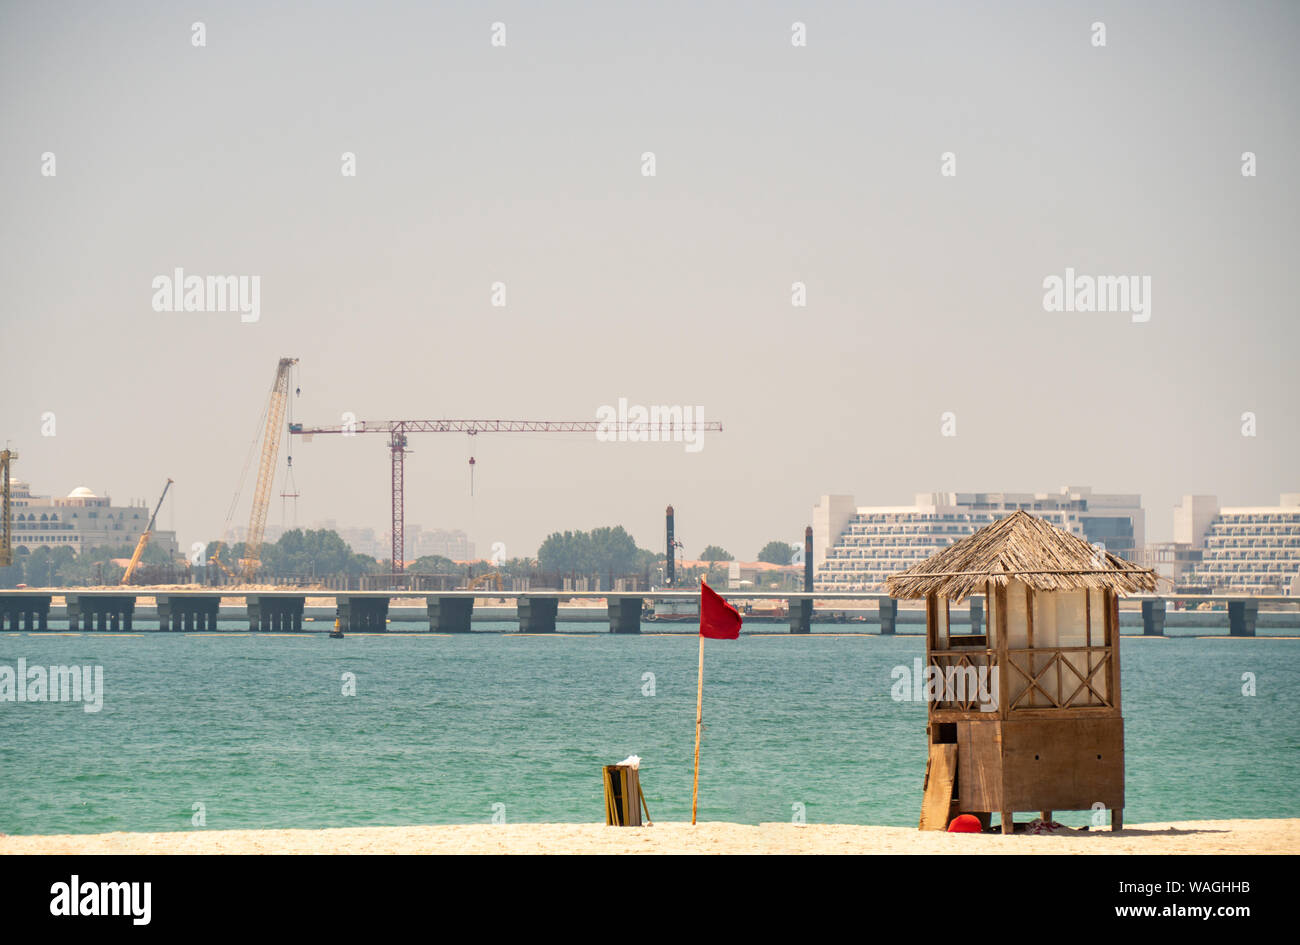 View of an empty beach with a red flag and life guard post. Dubai beach with a crane in the background Stock Photo